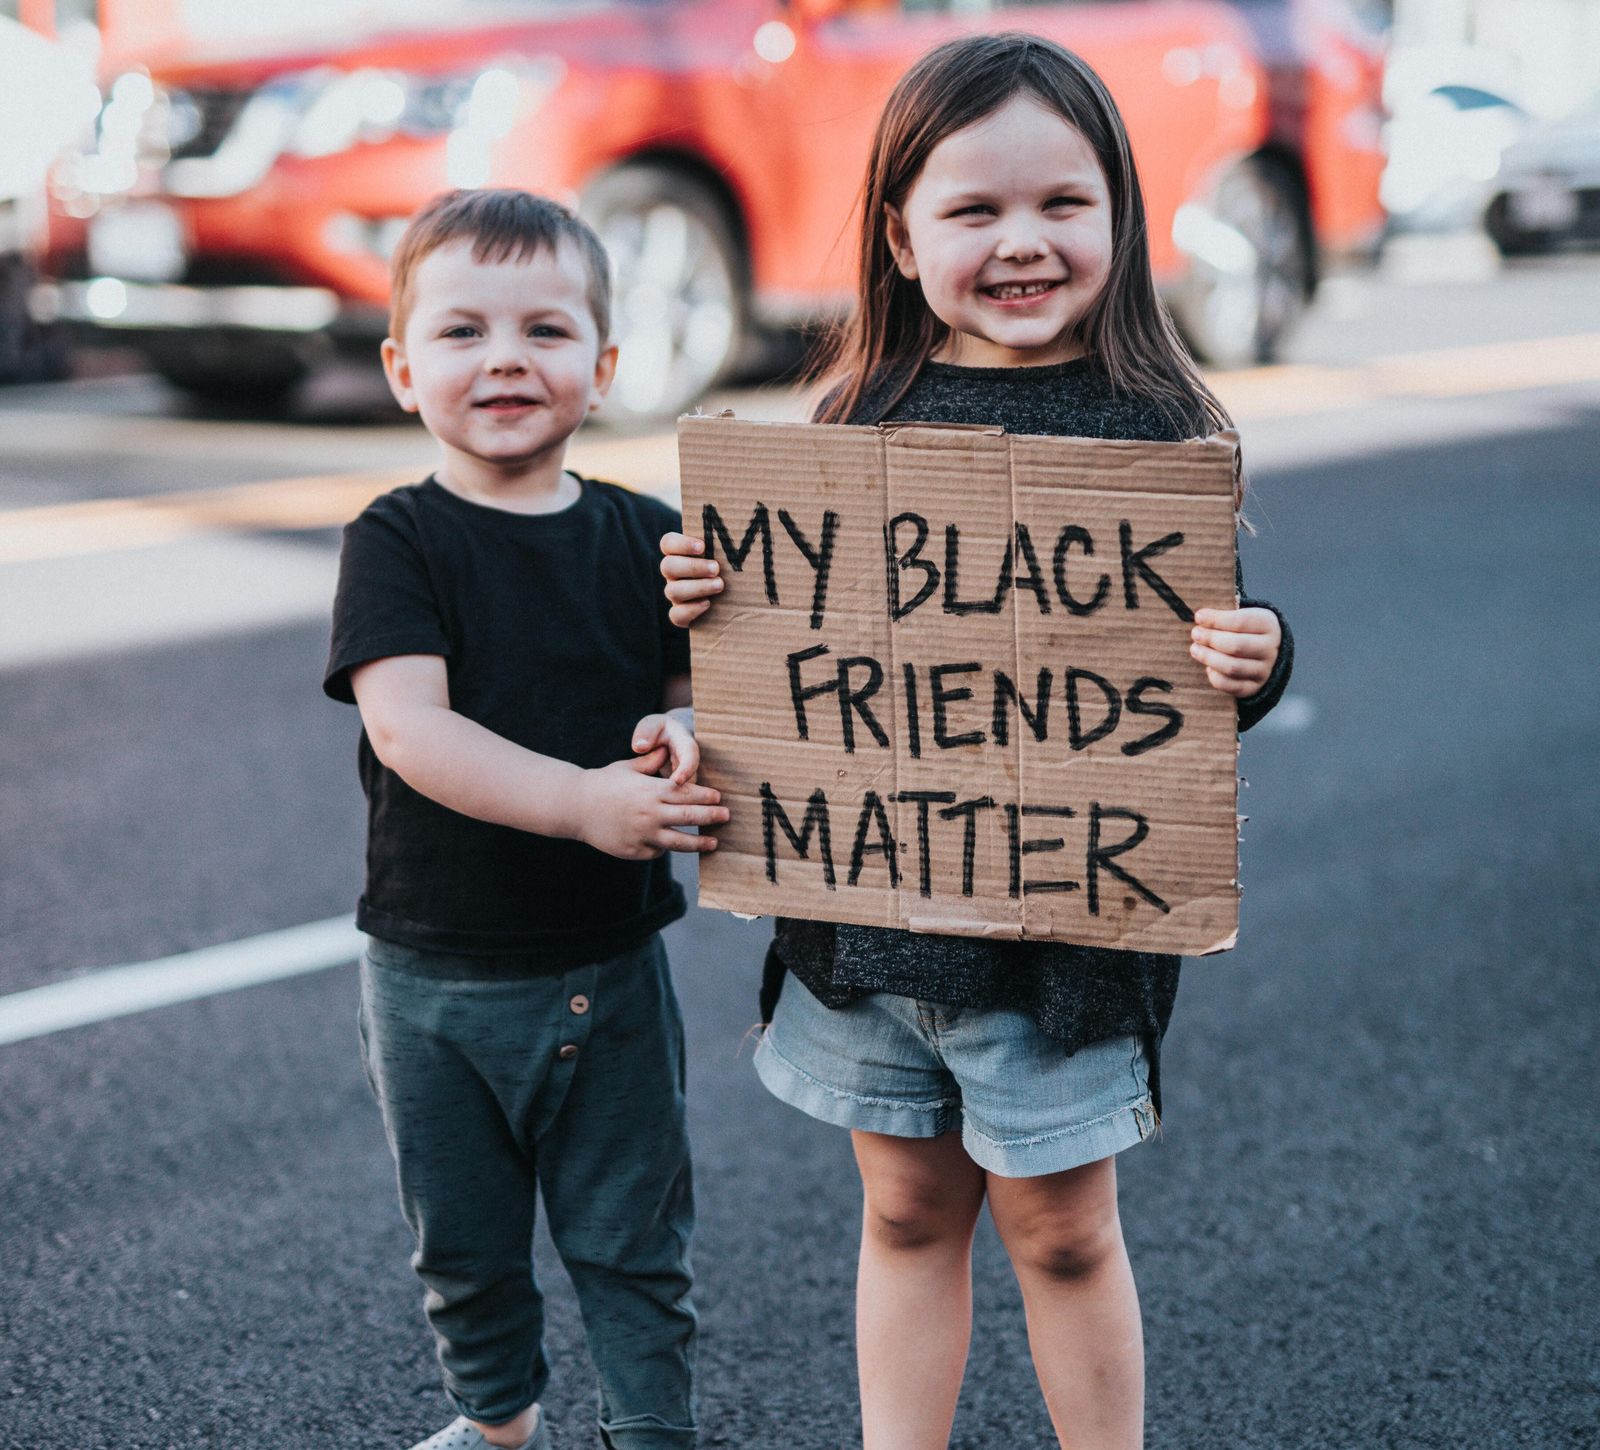 Kitchen Table CEOs Blog - How to Celebrate Black History with your Family year round - 2 children smiling at camera with a cardboard sign that says My Black Friends Matter